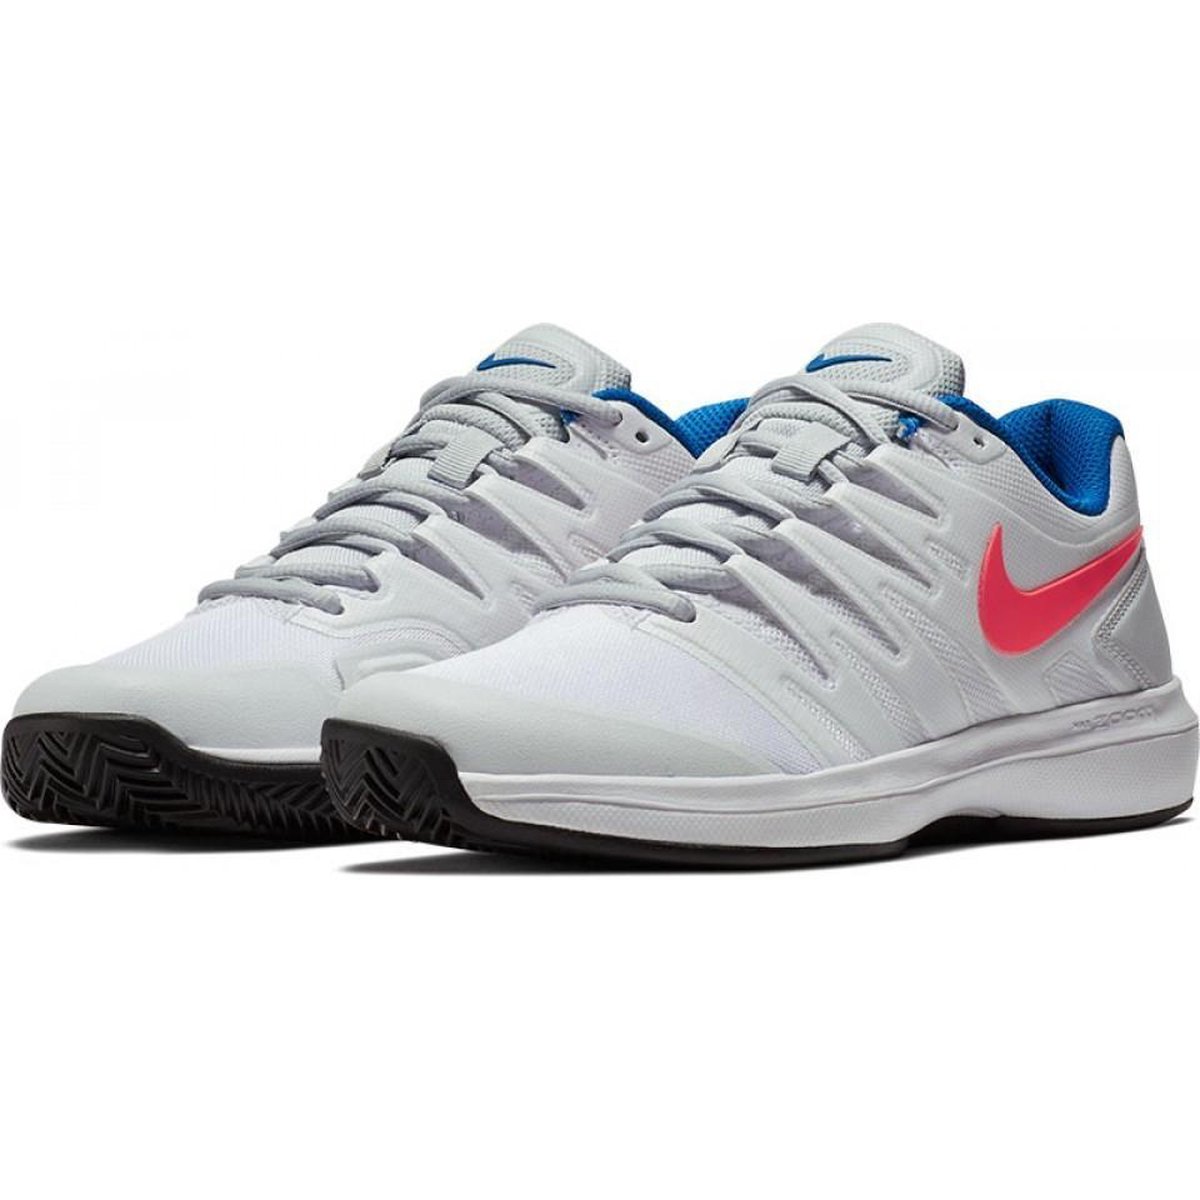 Nike Court Air Zoom Prestige Clay Clearance, 59% OFF |  www.smokymountains.org